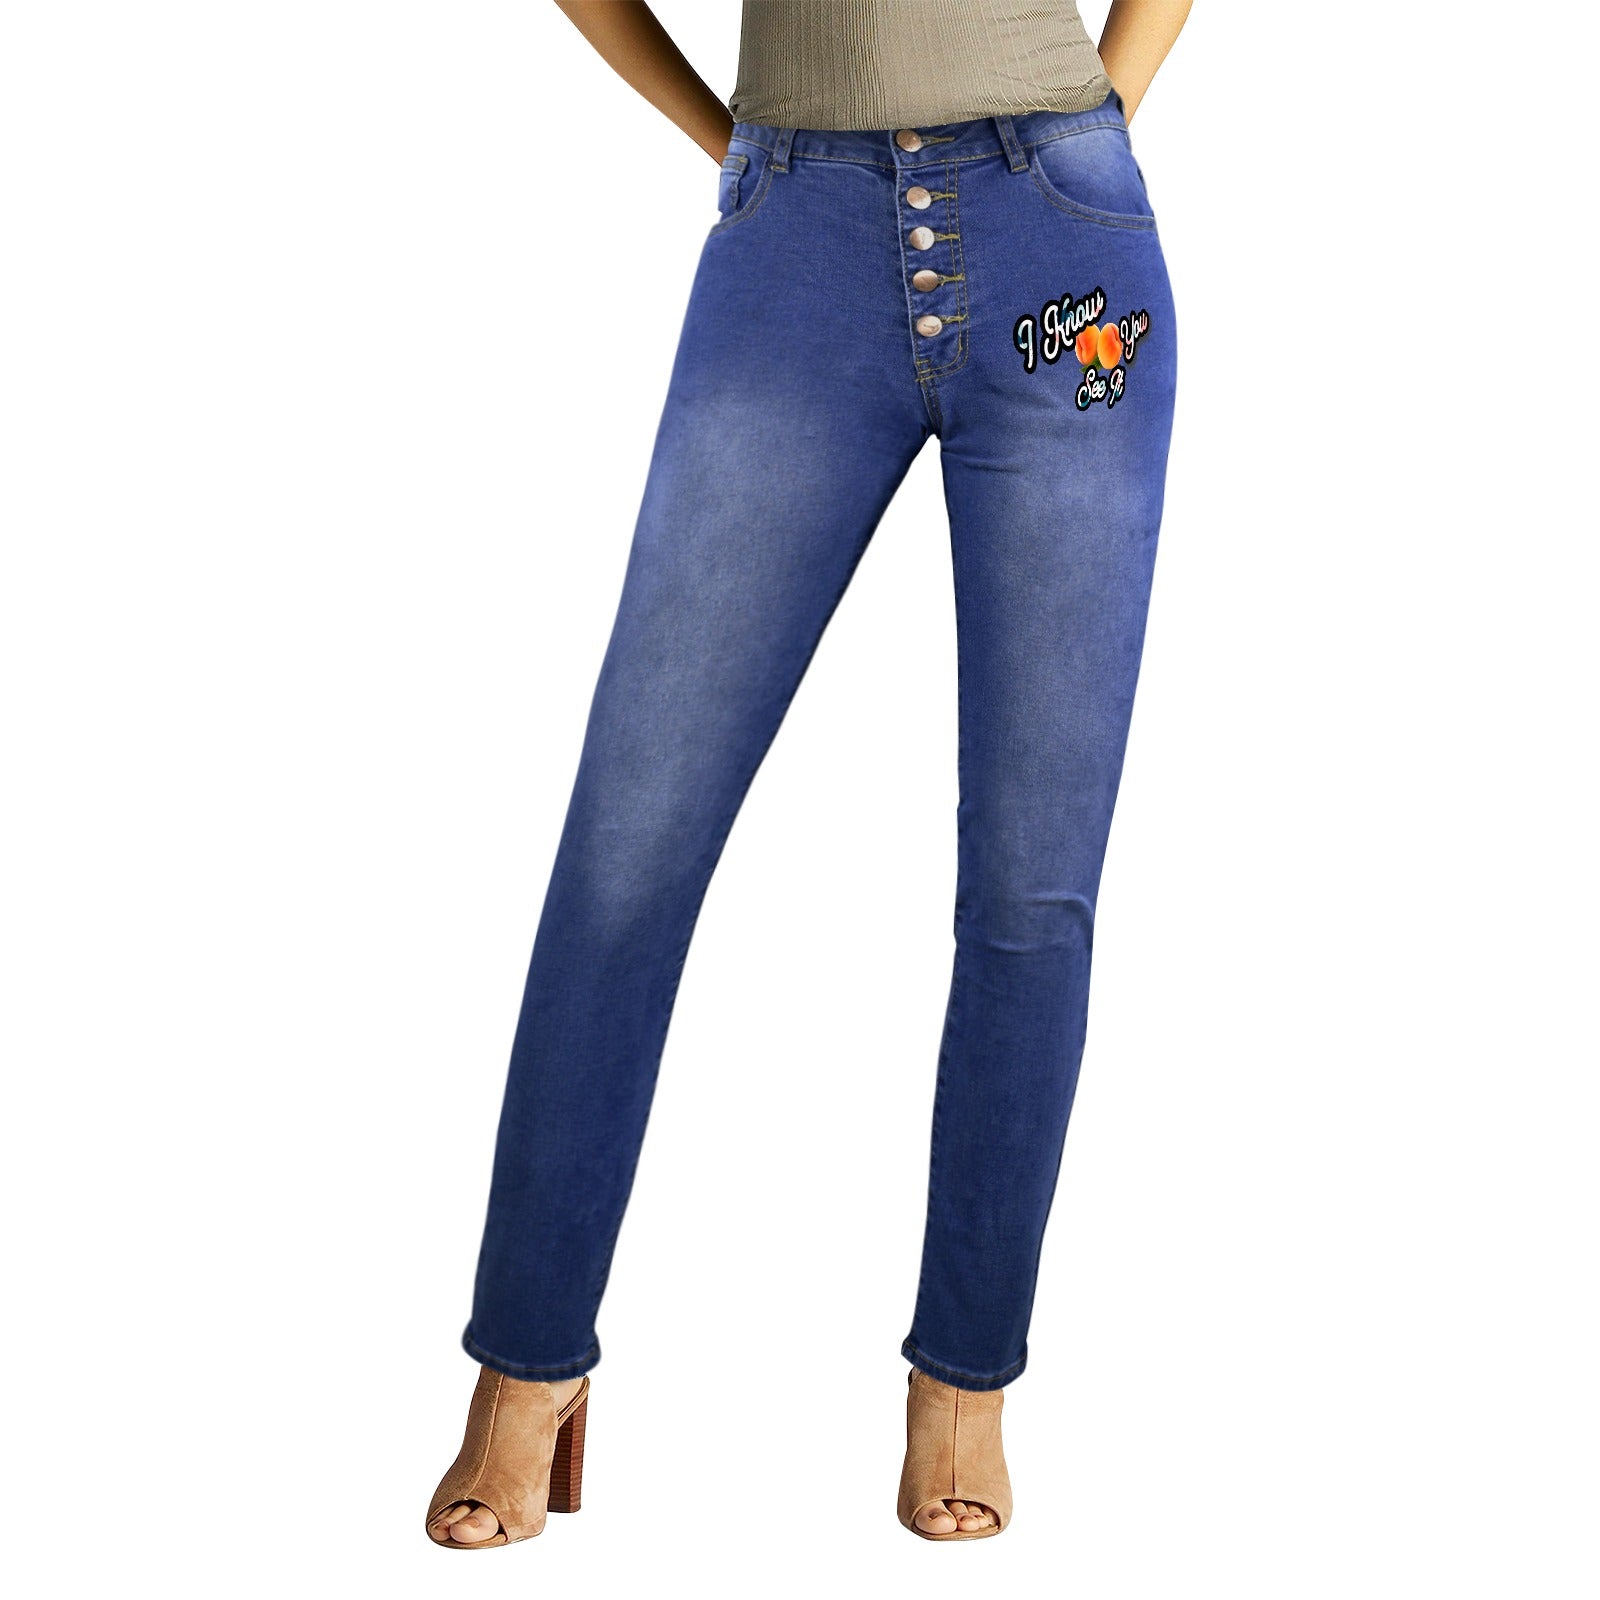 2XL - I Know You See It Women's Jeans - womens jeans at TFC&H Co.